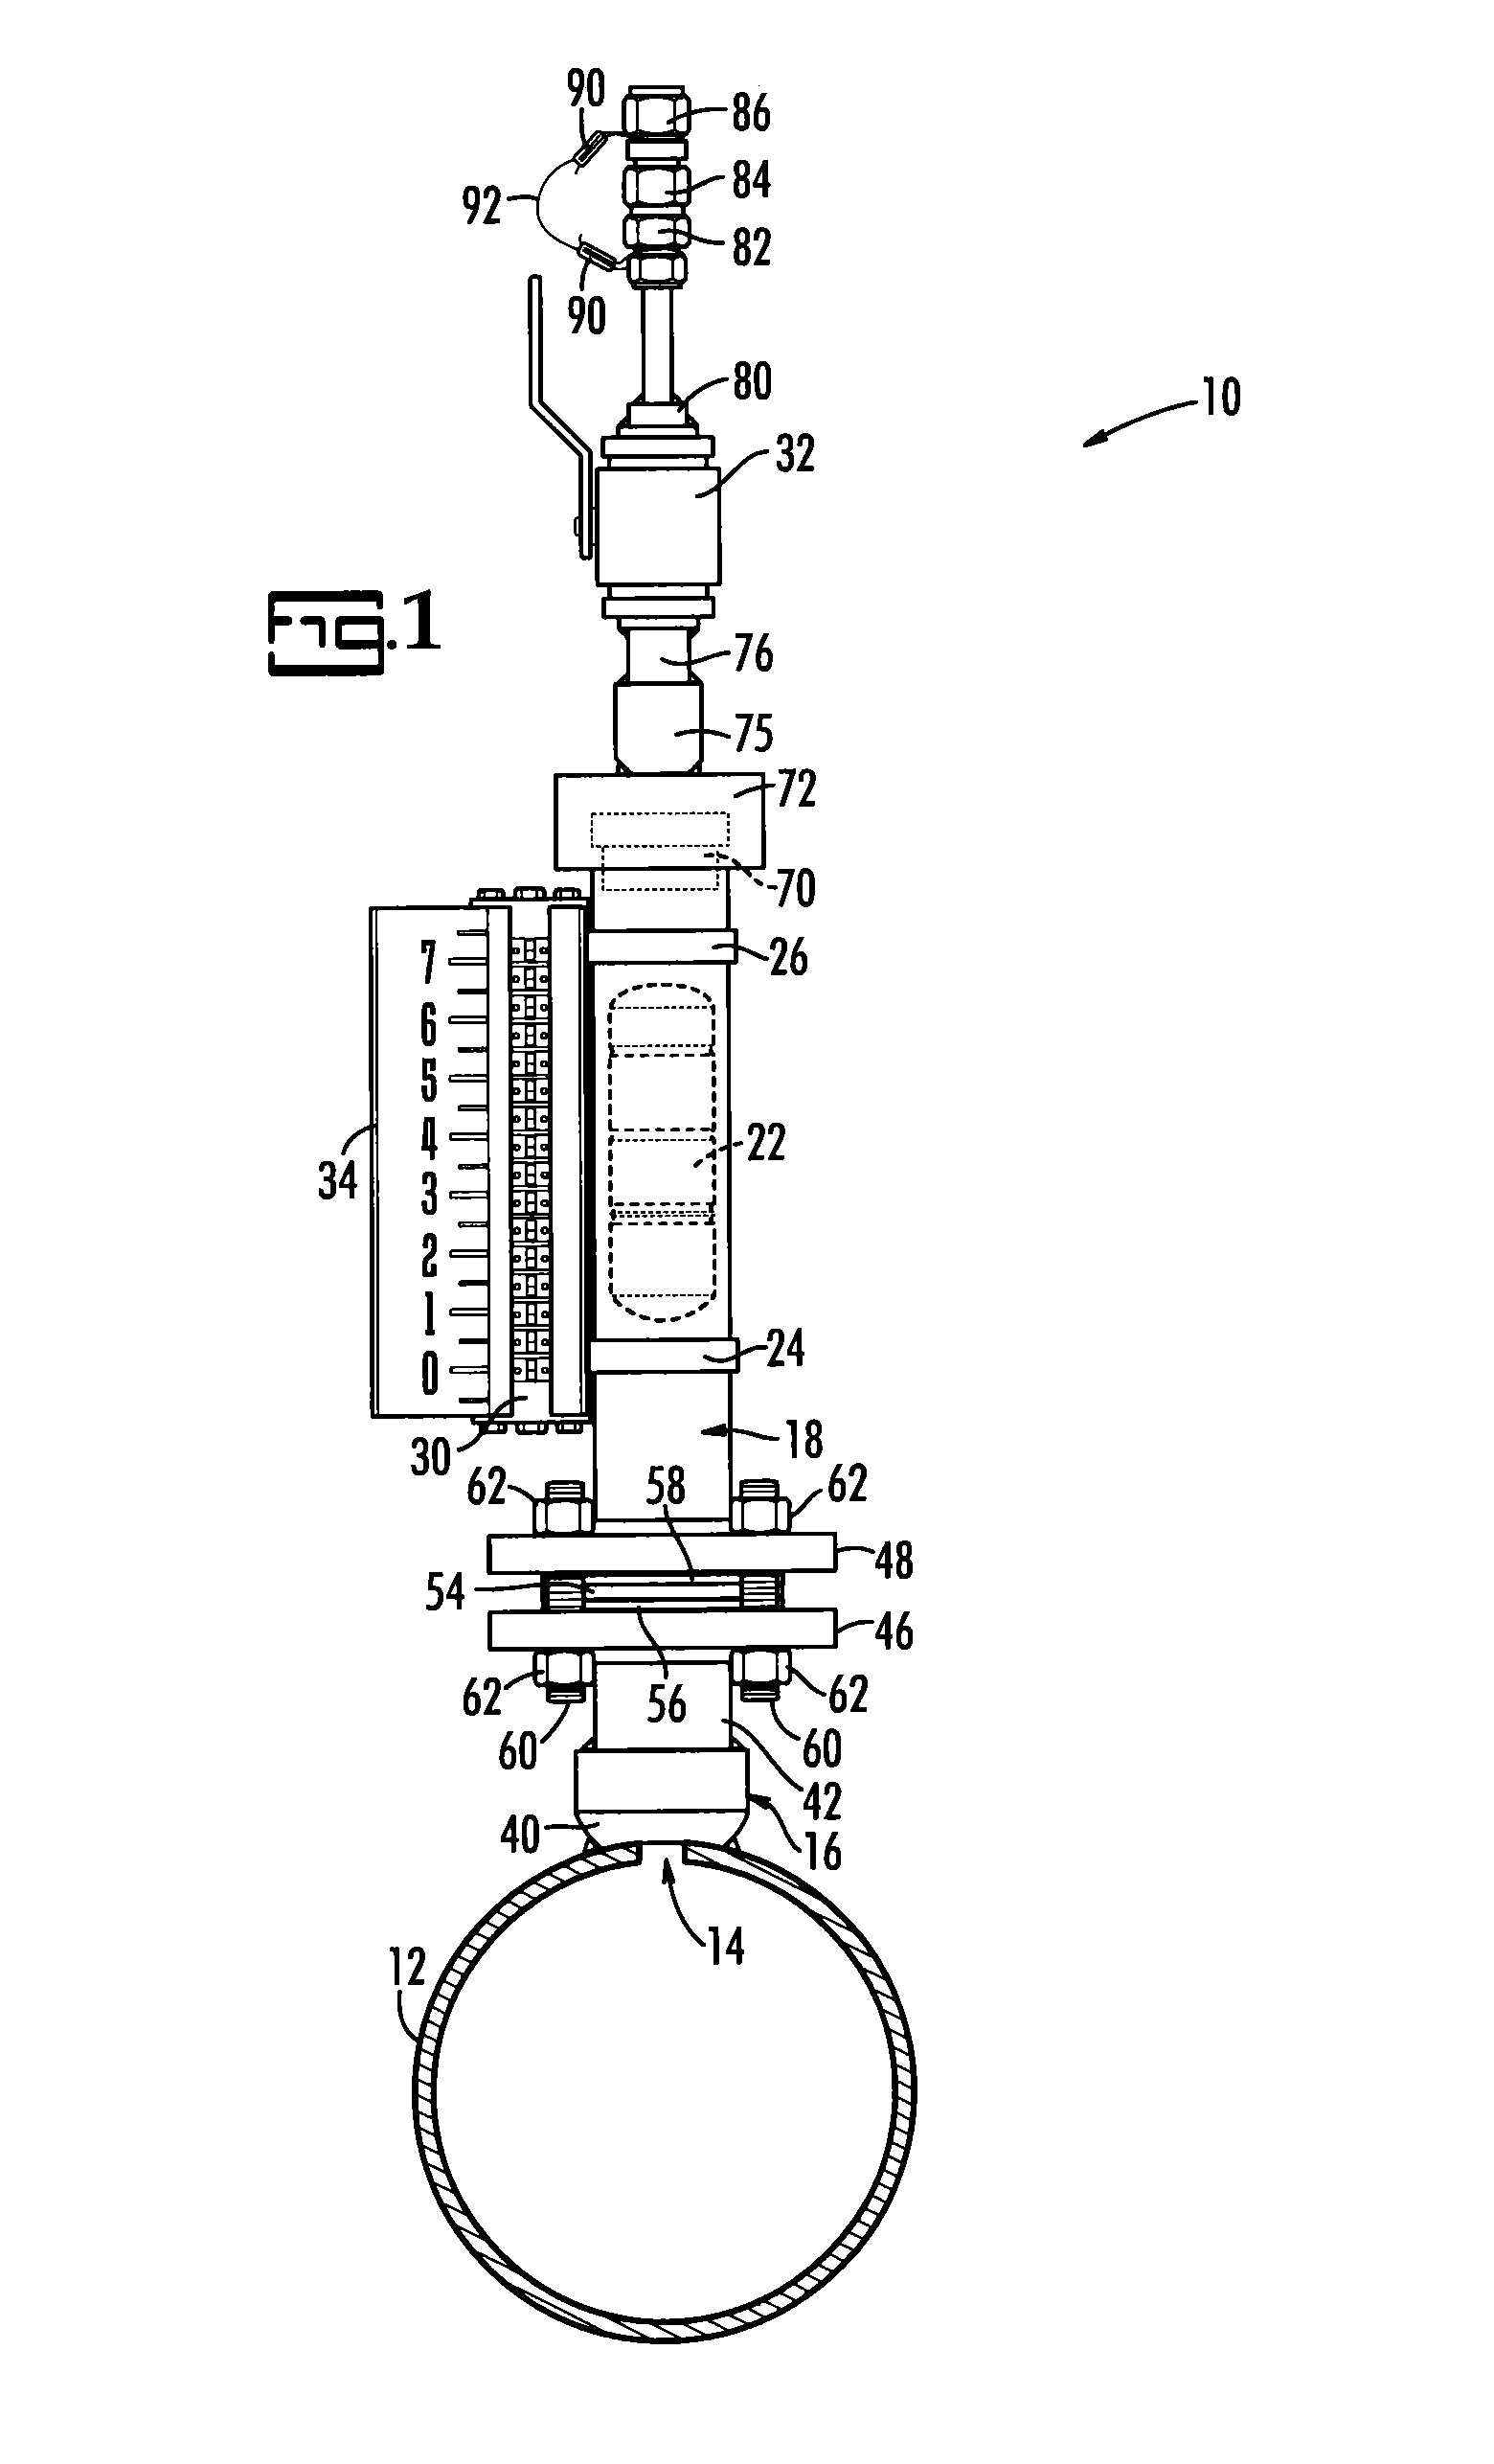 Nuclear Grade Air Accumulation, Indication and Venting Device